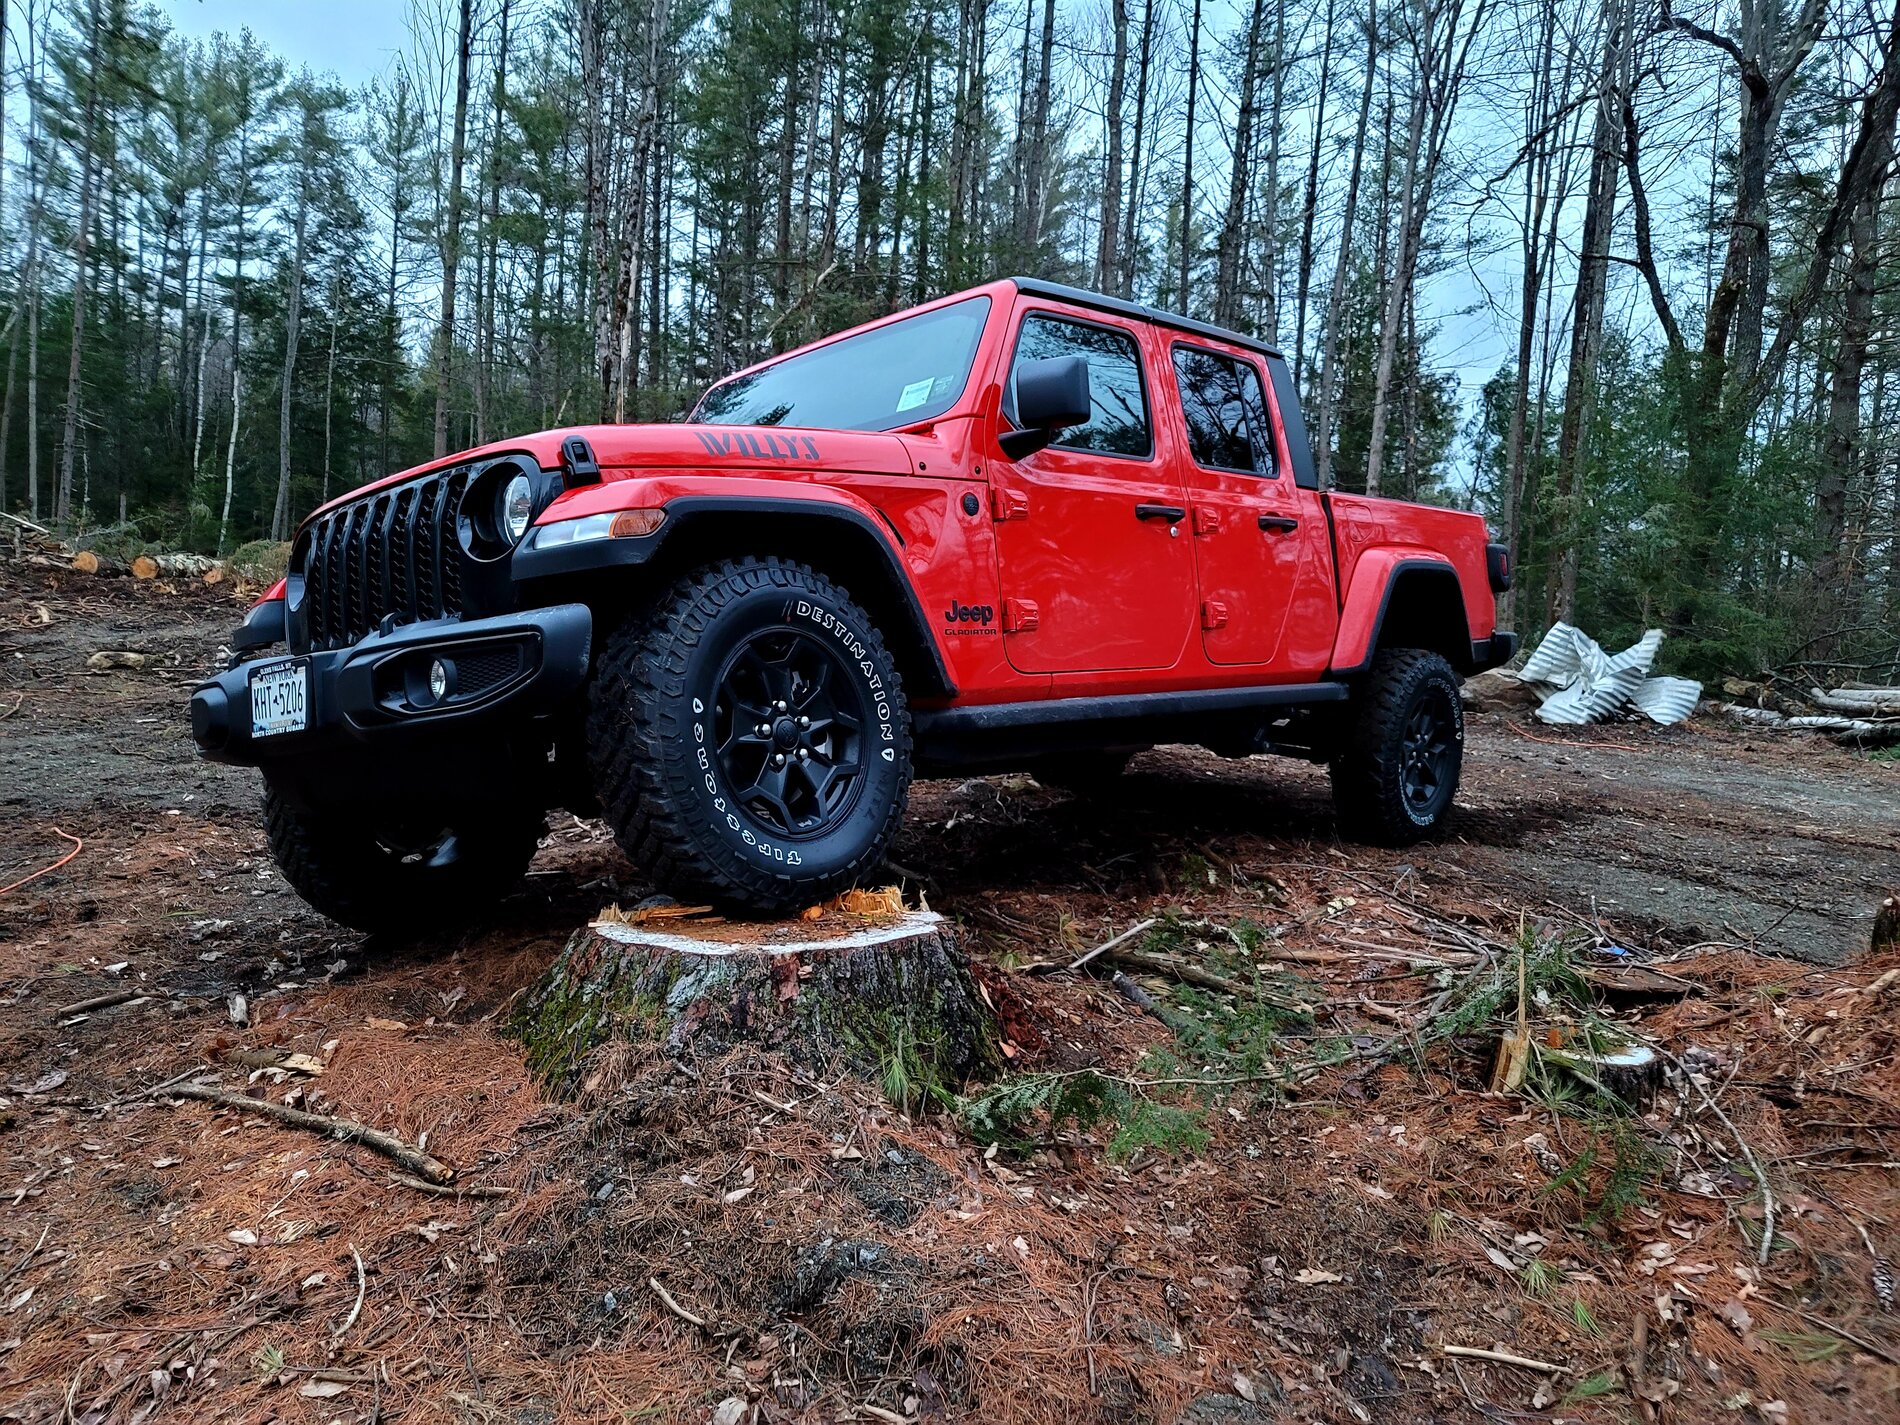 Jeep Gladiator Took Delivery of Your JT? Sign in Here! 20210326_191702